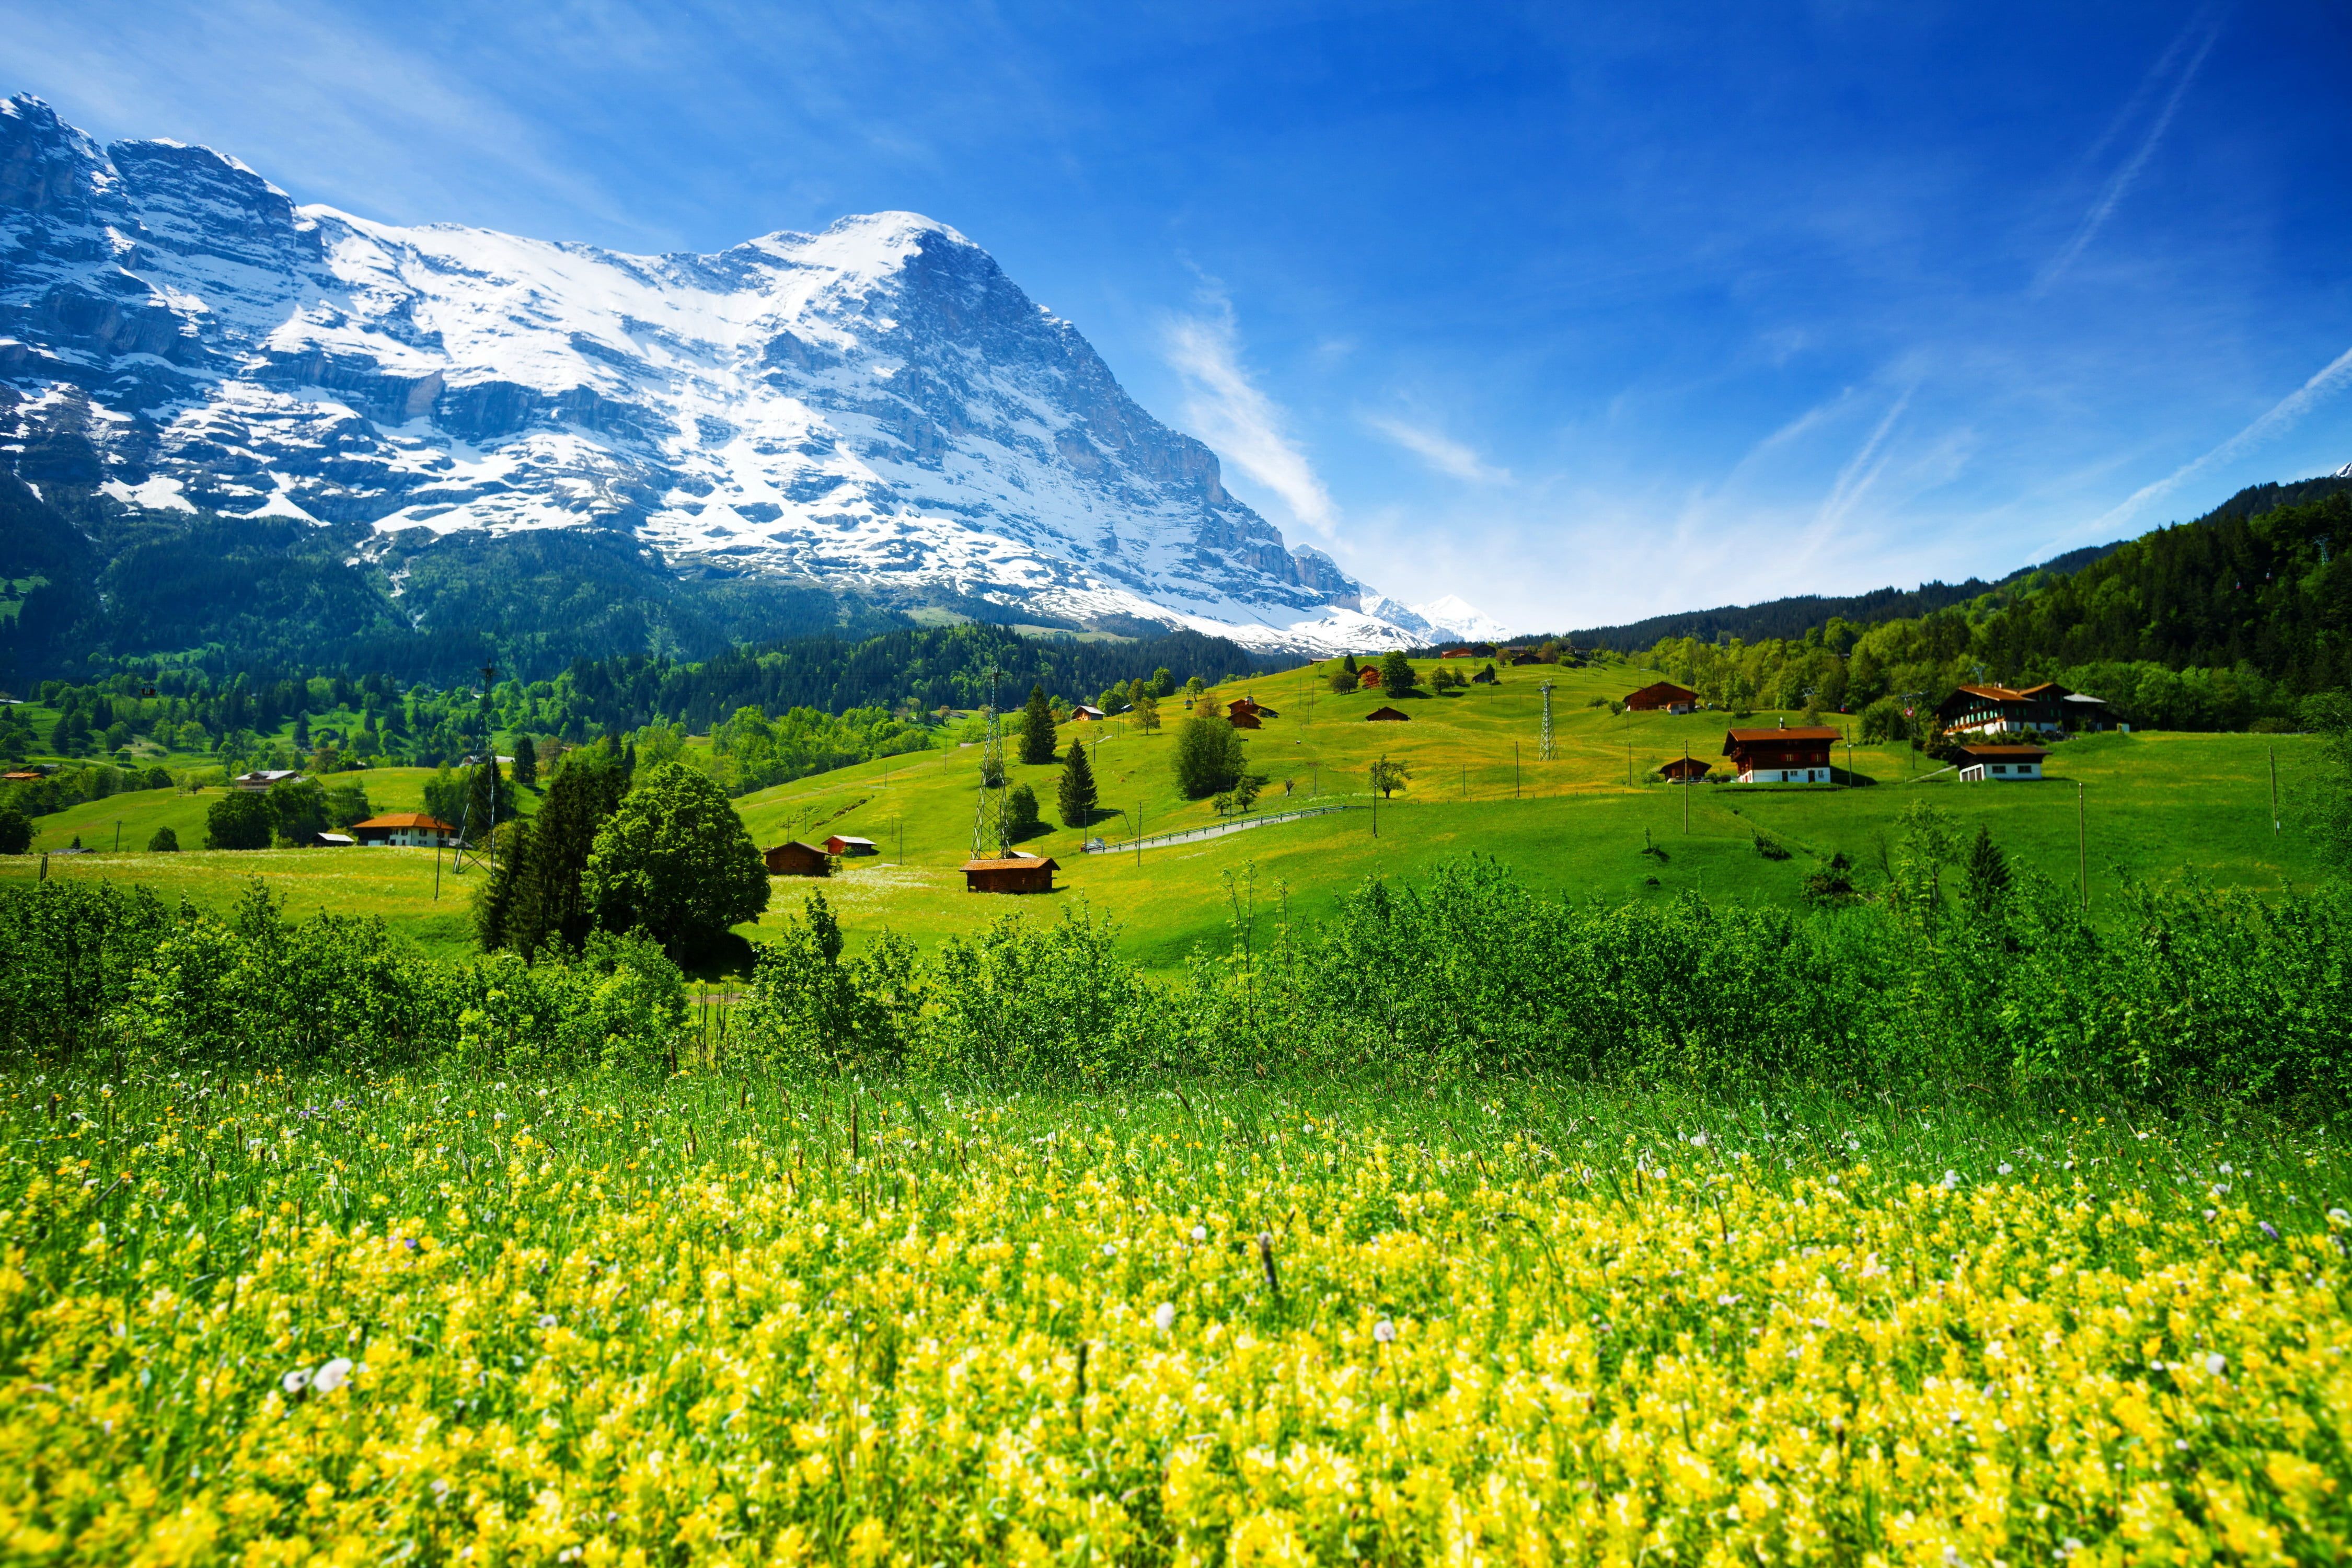 nature photography of yellow flower field and glacier mountain under blue sky #greens #forest #grass #flowers #mountains #f. Landscape, Nature photography, Nature